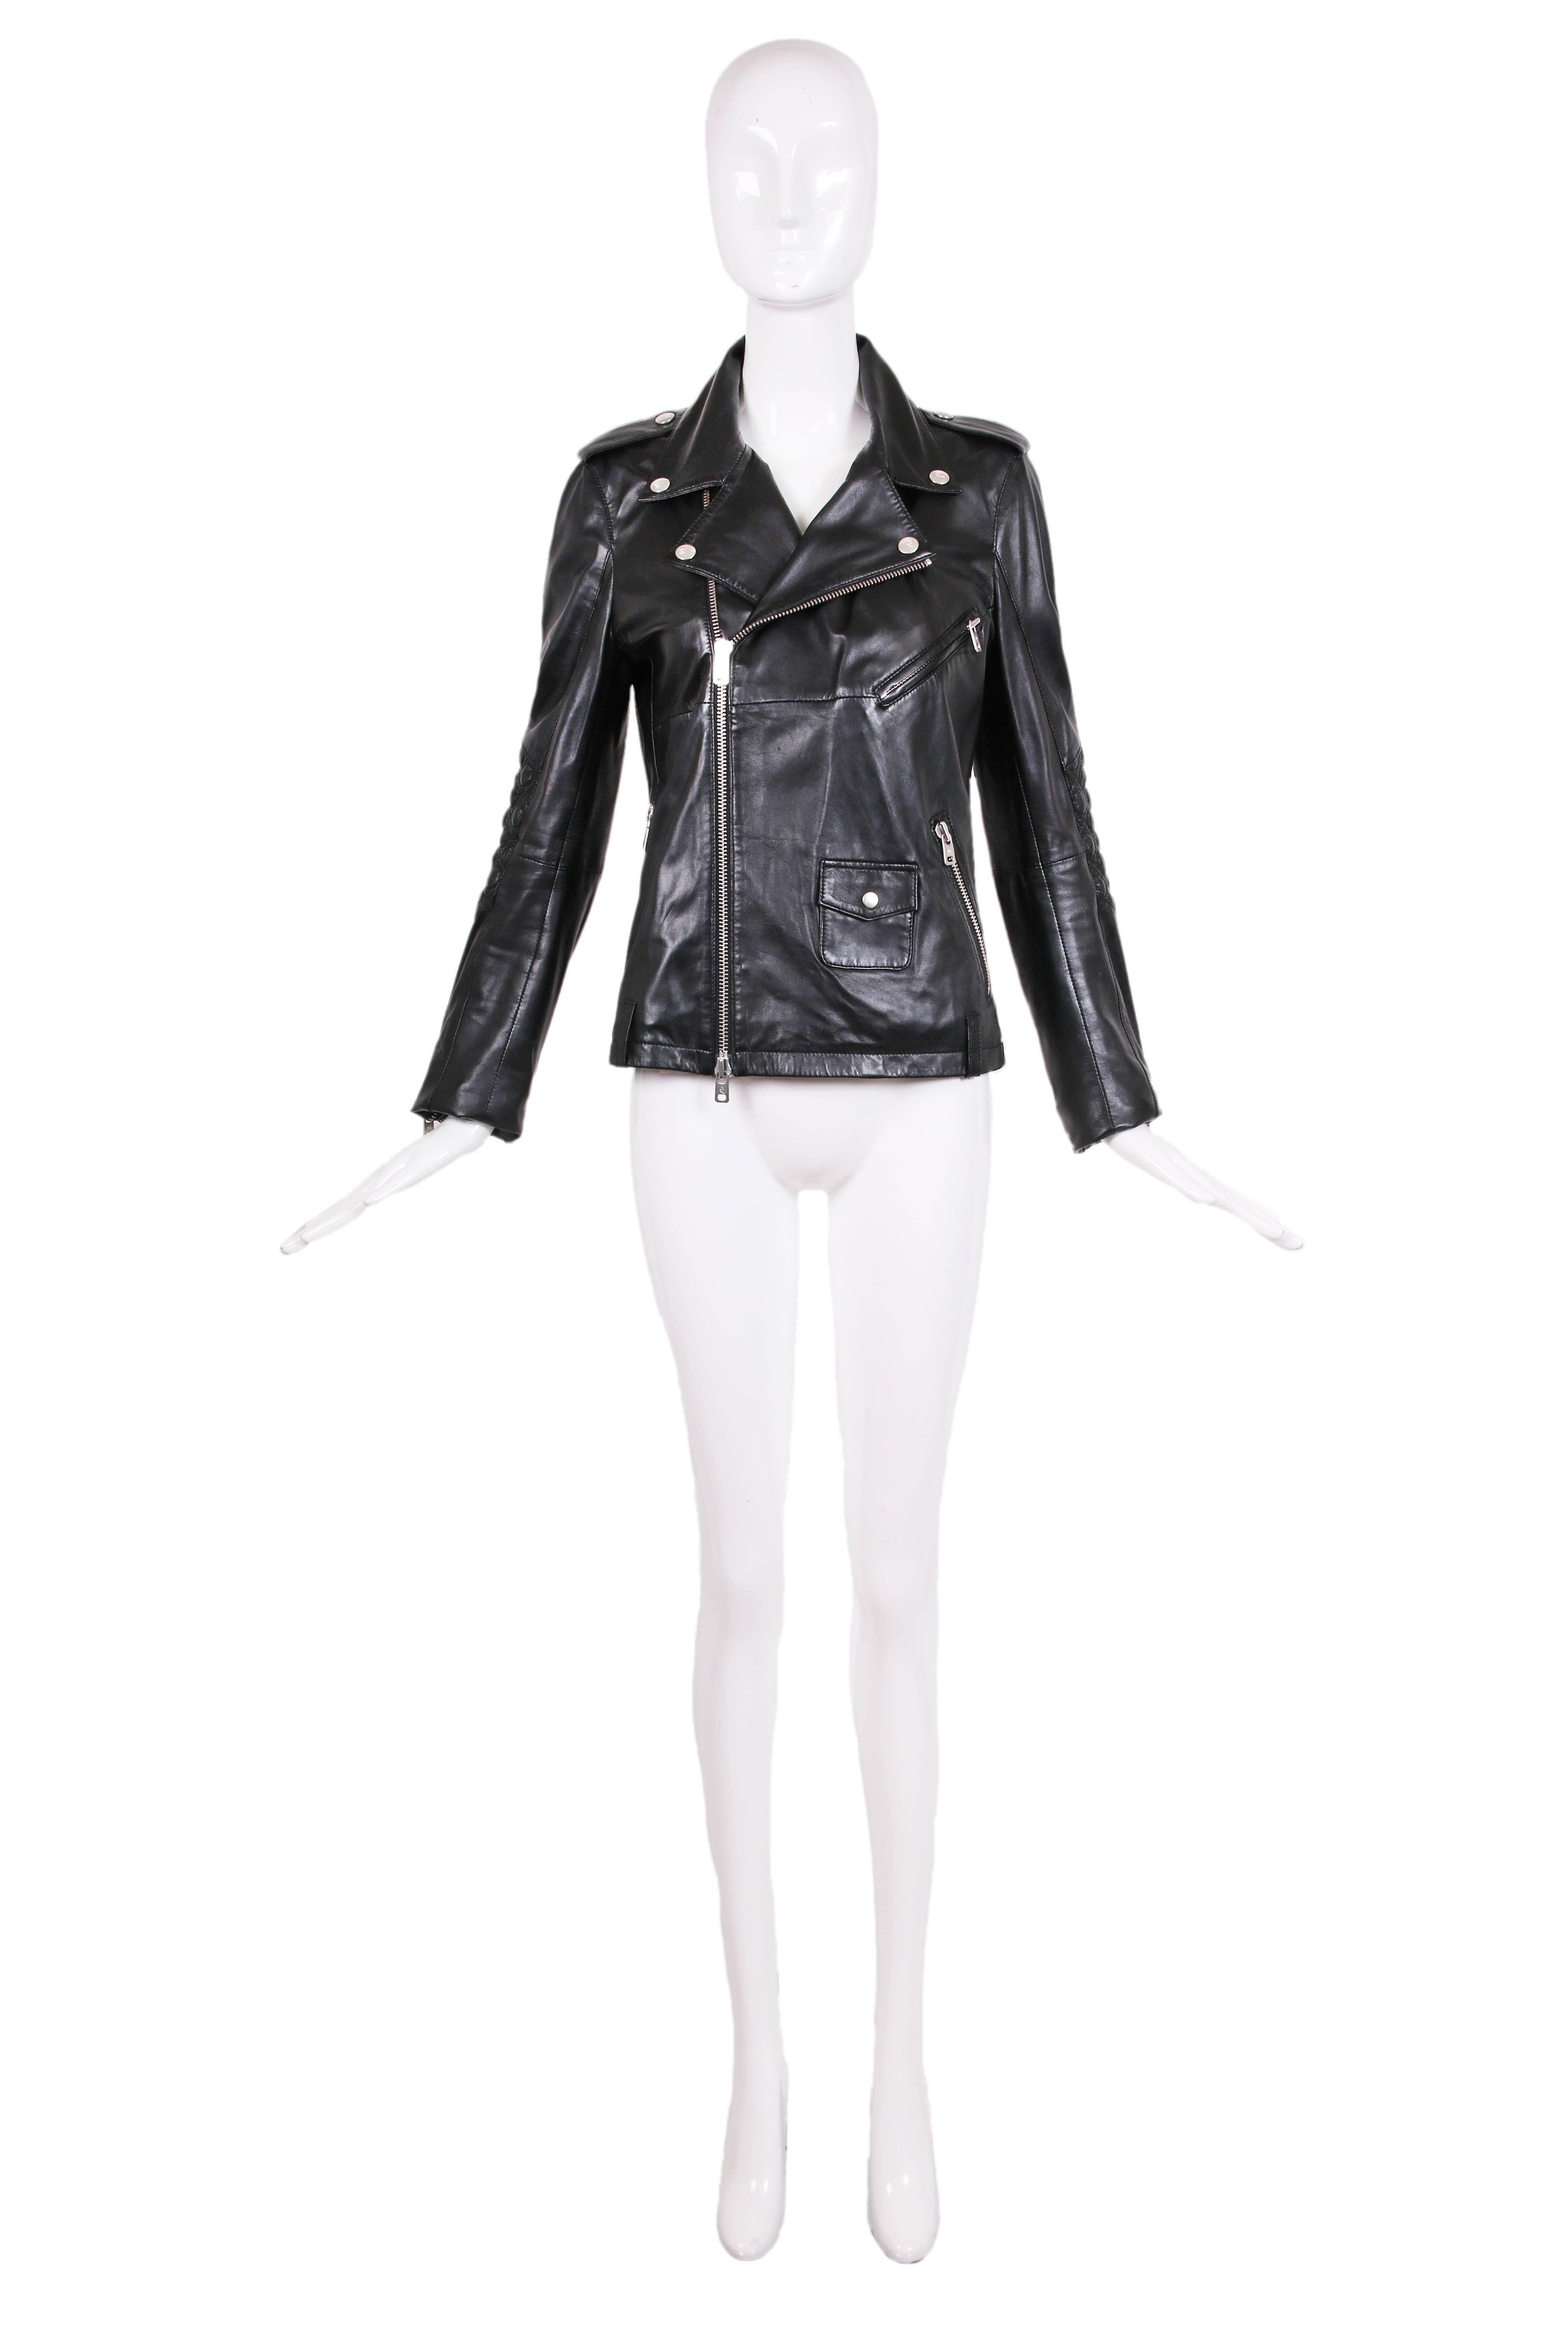 2011 Alexander McQueen McQ label black leather motorcycle jacket. In excellent condition - size 44.
MEASUREMENTS:
Shoulders - 15"
Sleeves - 26"
Bust - 36"
Waist - 34"
Length - 25"